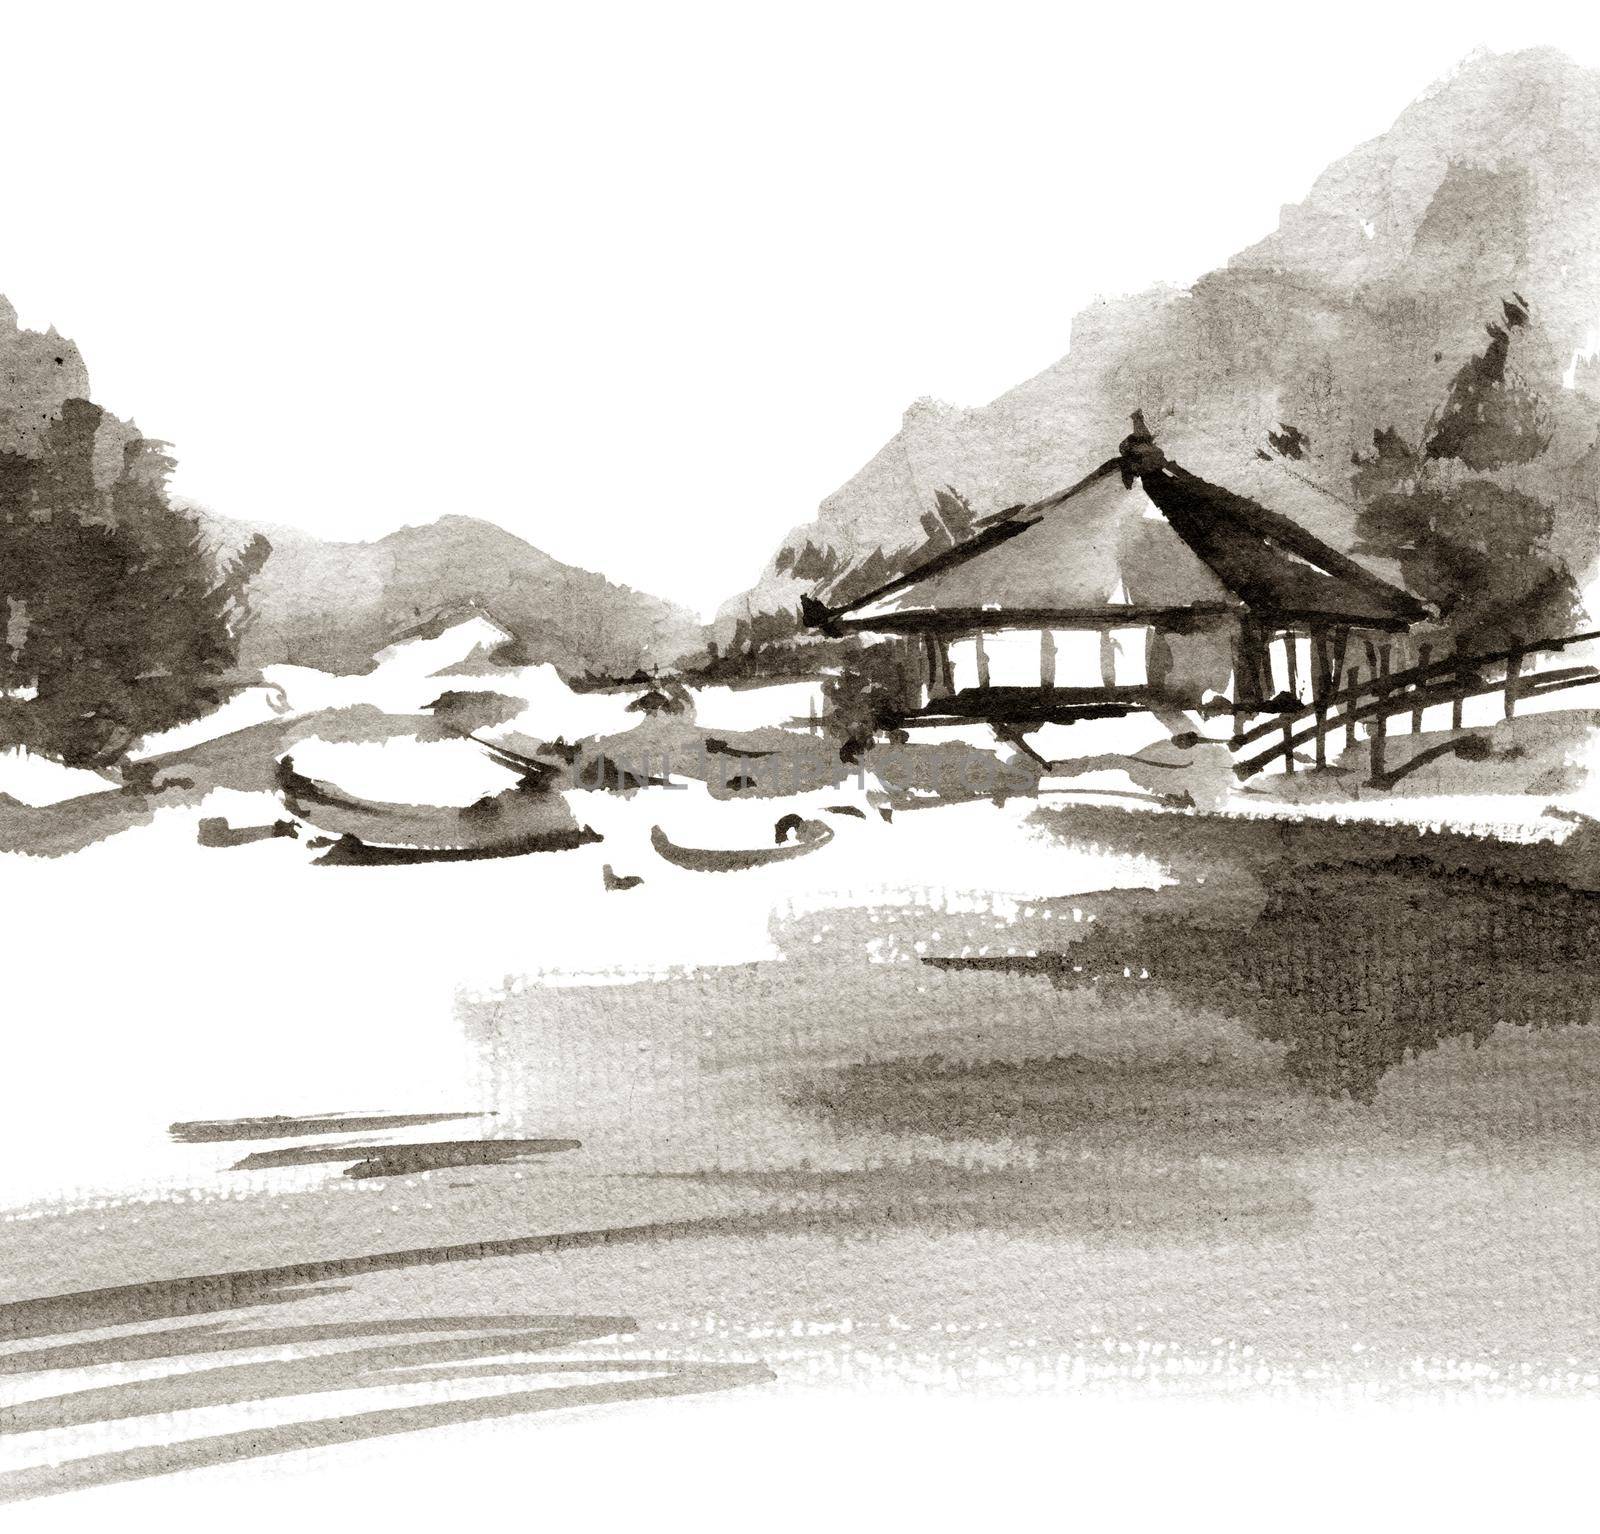 Landscape with building and stones - grayscale ink painting on white background. Oriental traditional ink painting in sumi-e style.